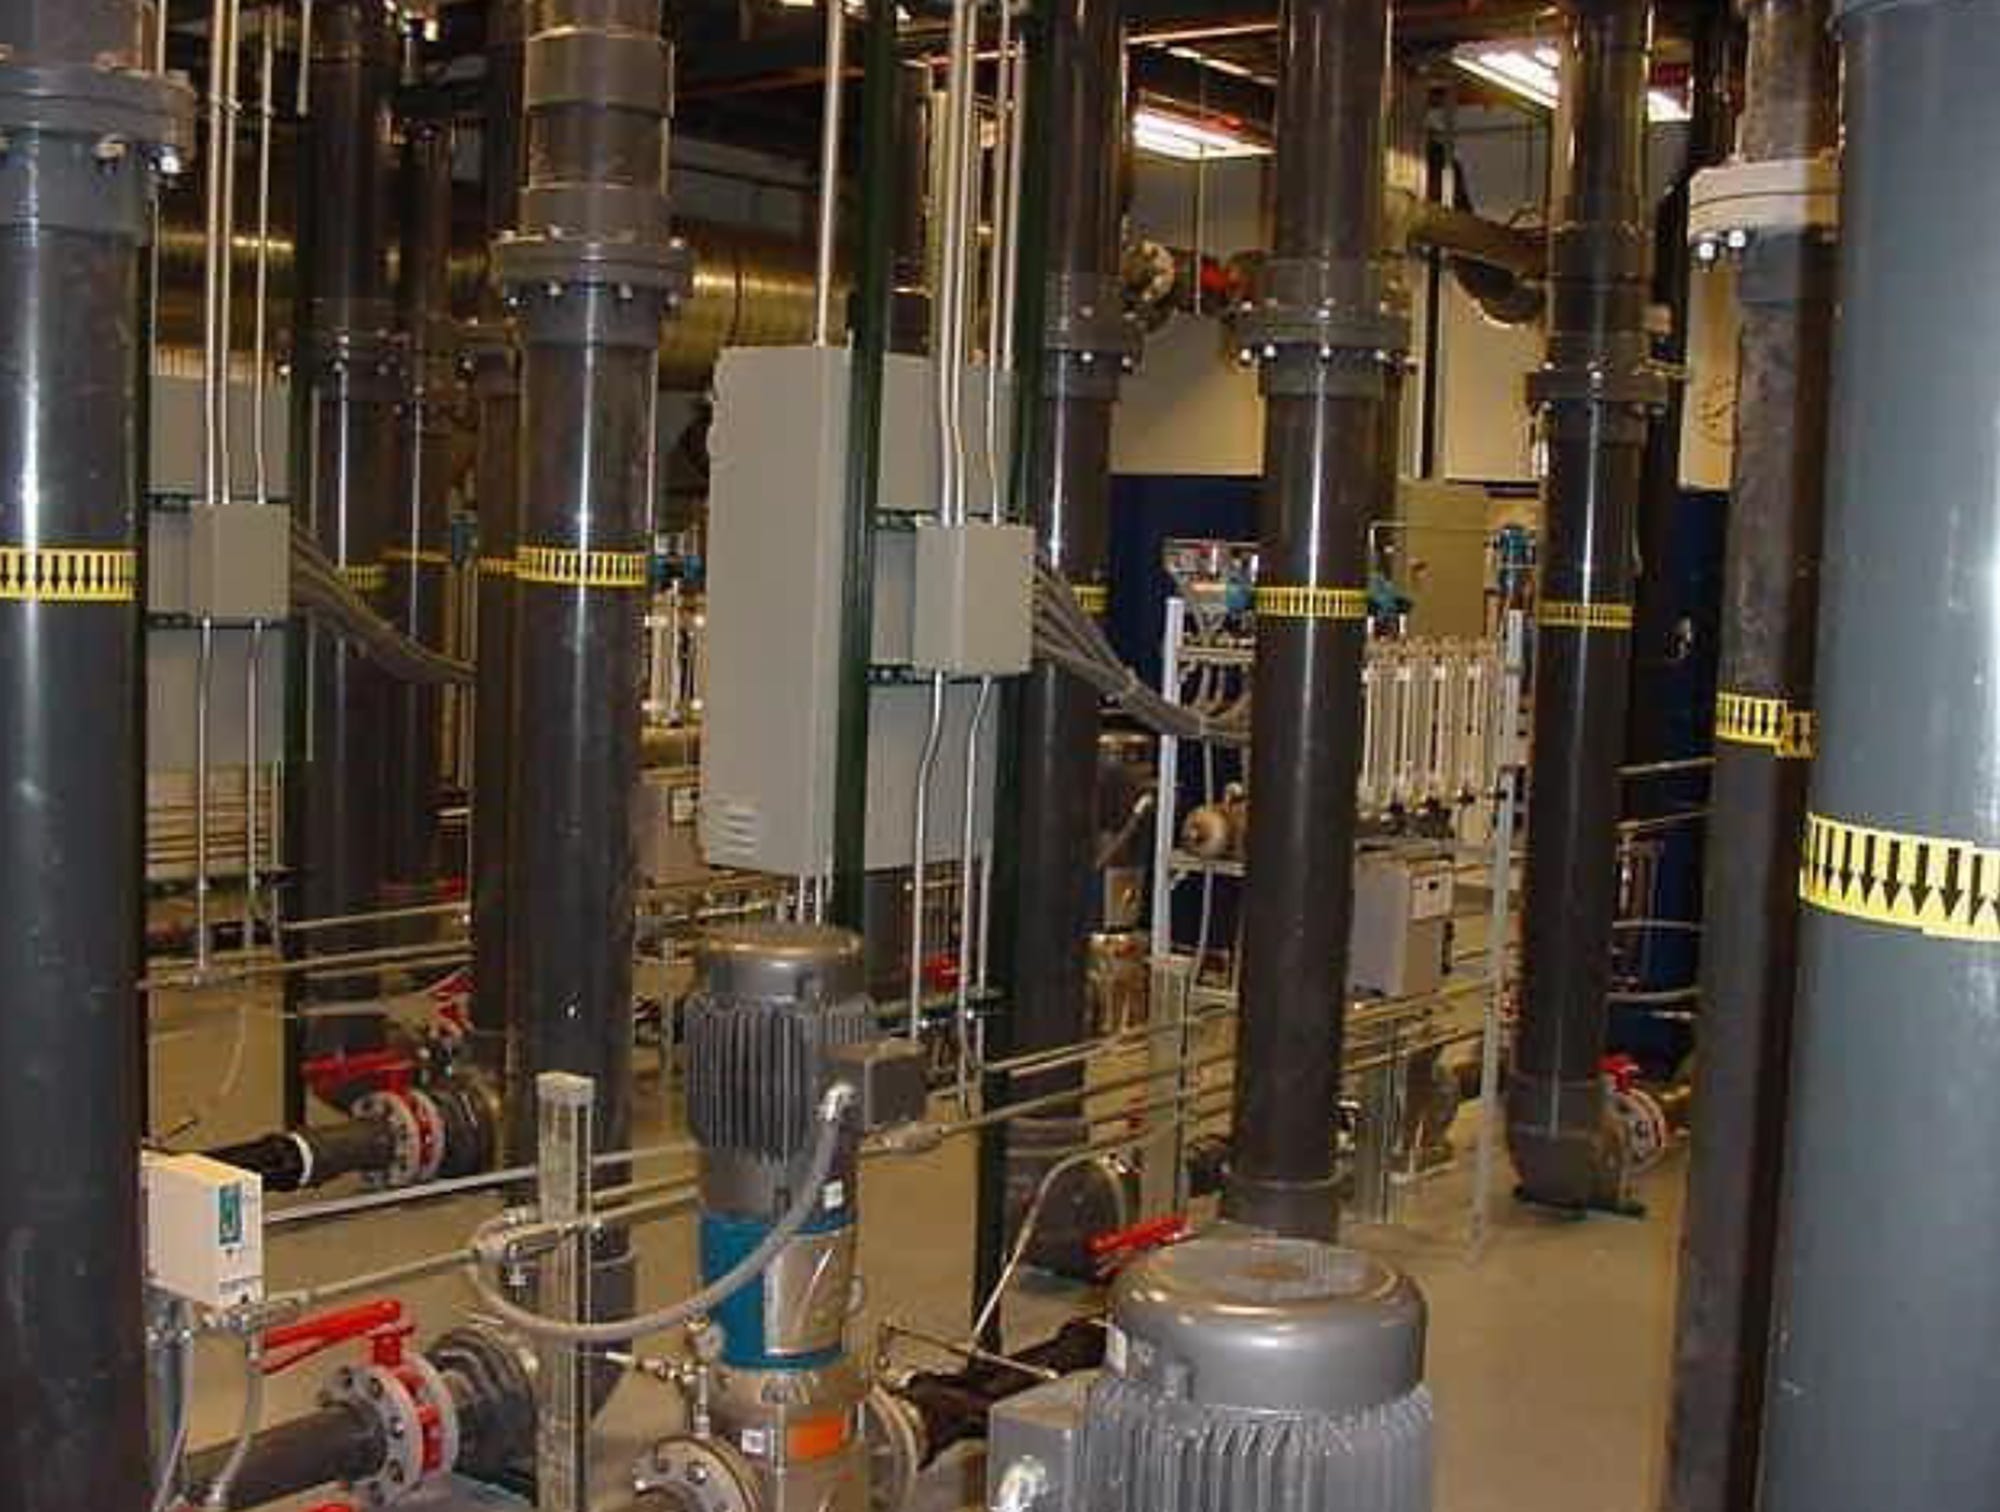 This image, contained in a technical report on the Gelman Sciences site remediation prepared for the Washtenaw County Circuit Court, shows the Gelman Ozone/Hydrogen Peroxide Treatment System for reducing dioxane levels in Ann Arbor area groundwater. Gelman operates one of the largest 1,4-dioxane remediation systems in the world. Groundwater from multiple wells is pumped from the ground and transferred to Gelman’s Wagner Road facility for treatment.